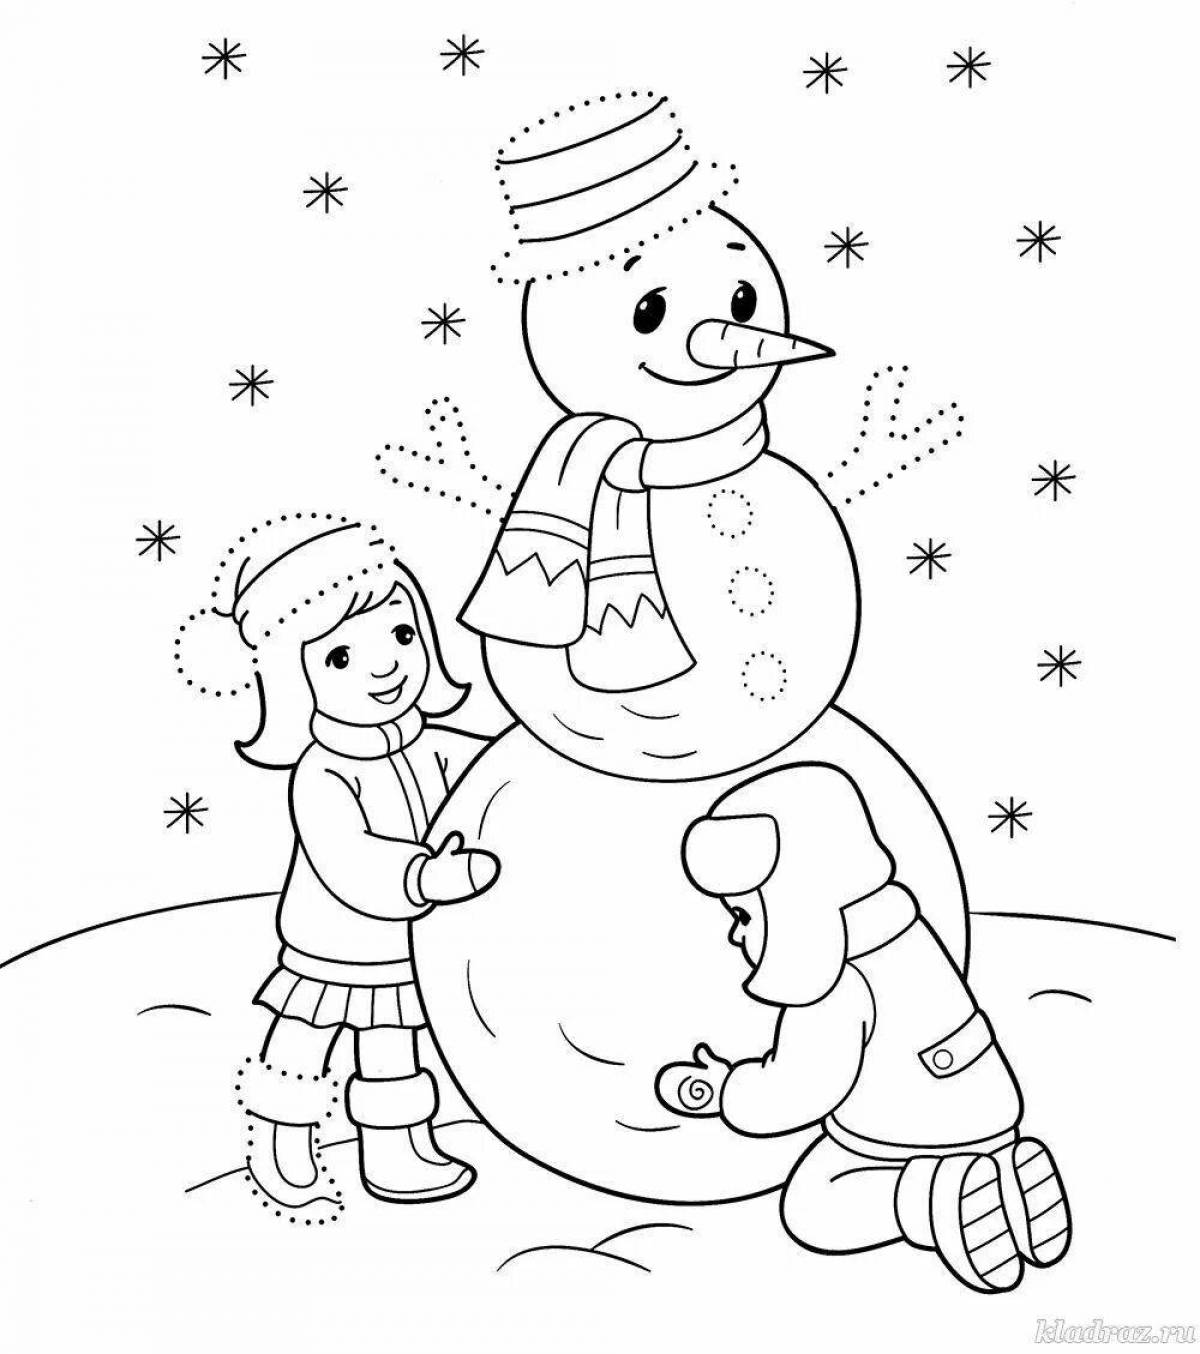 Live winter coloring book for children 4-5 years old